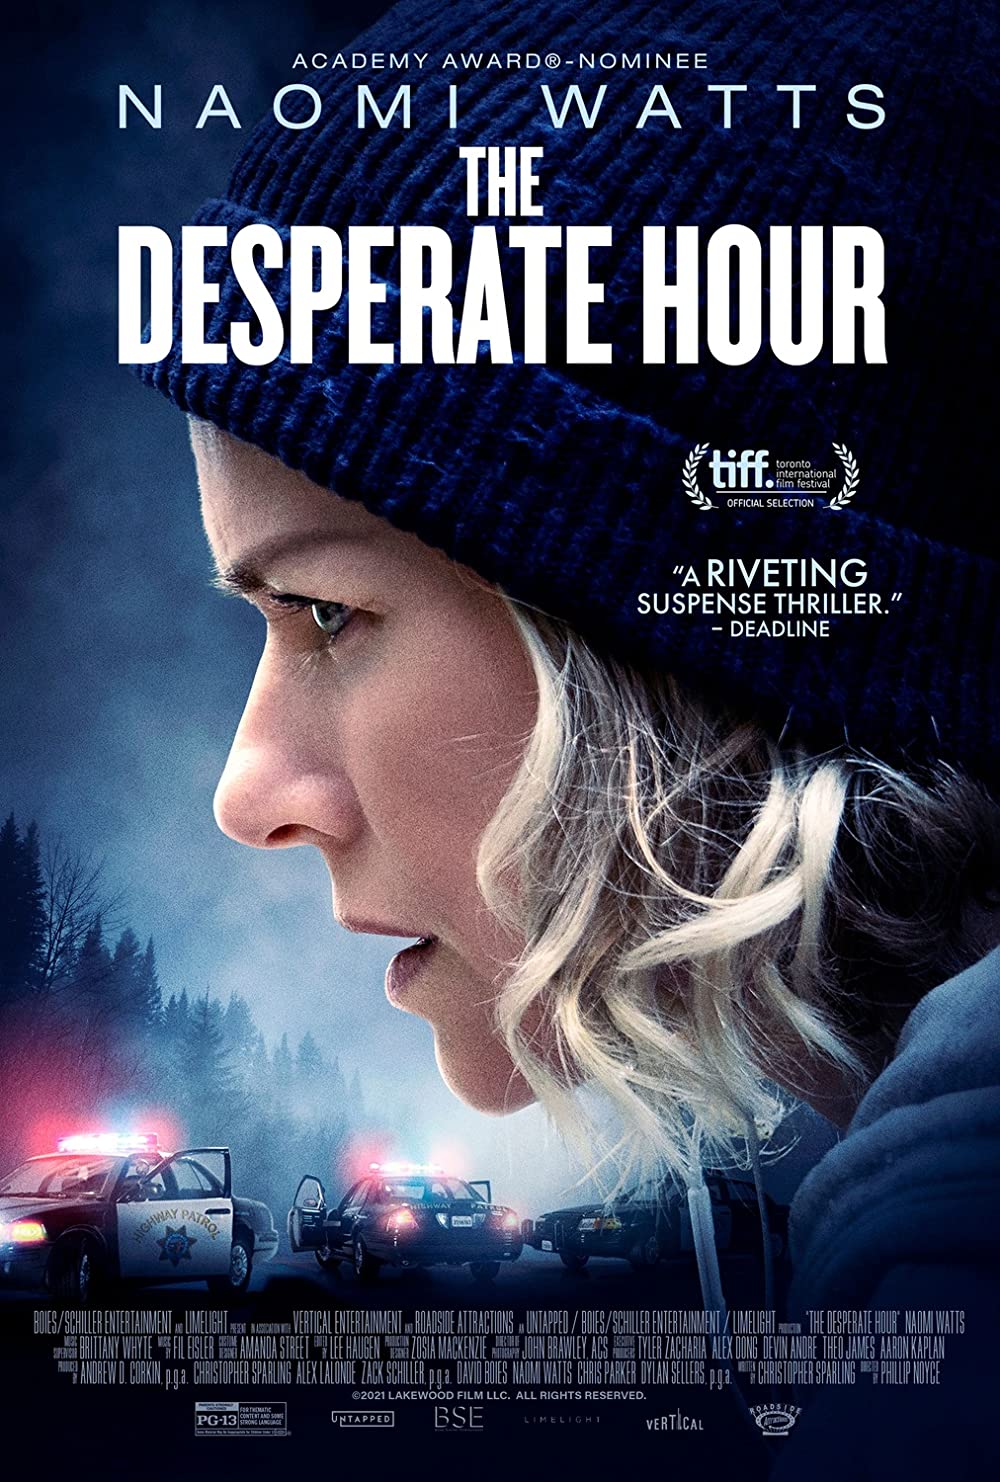 Image for "Desperate Hour"